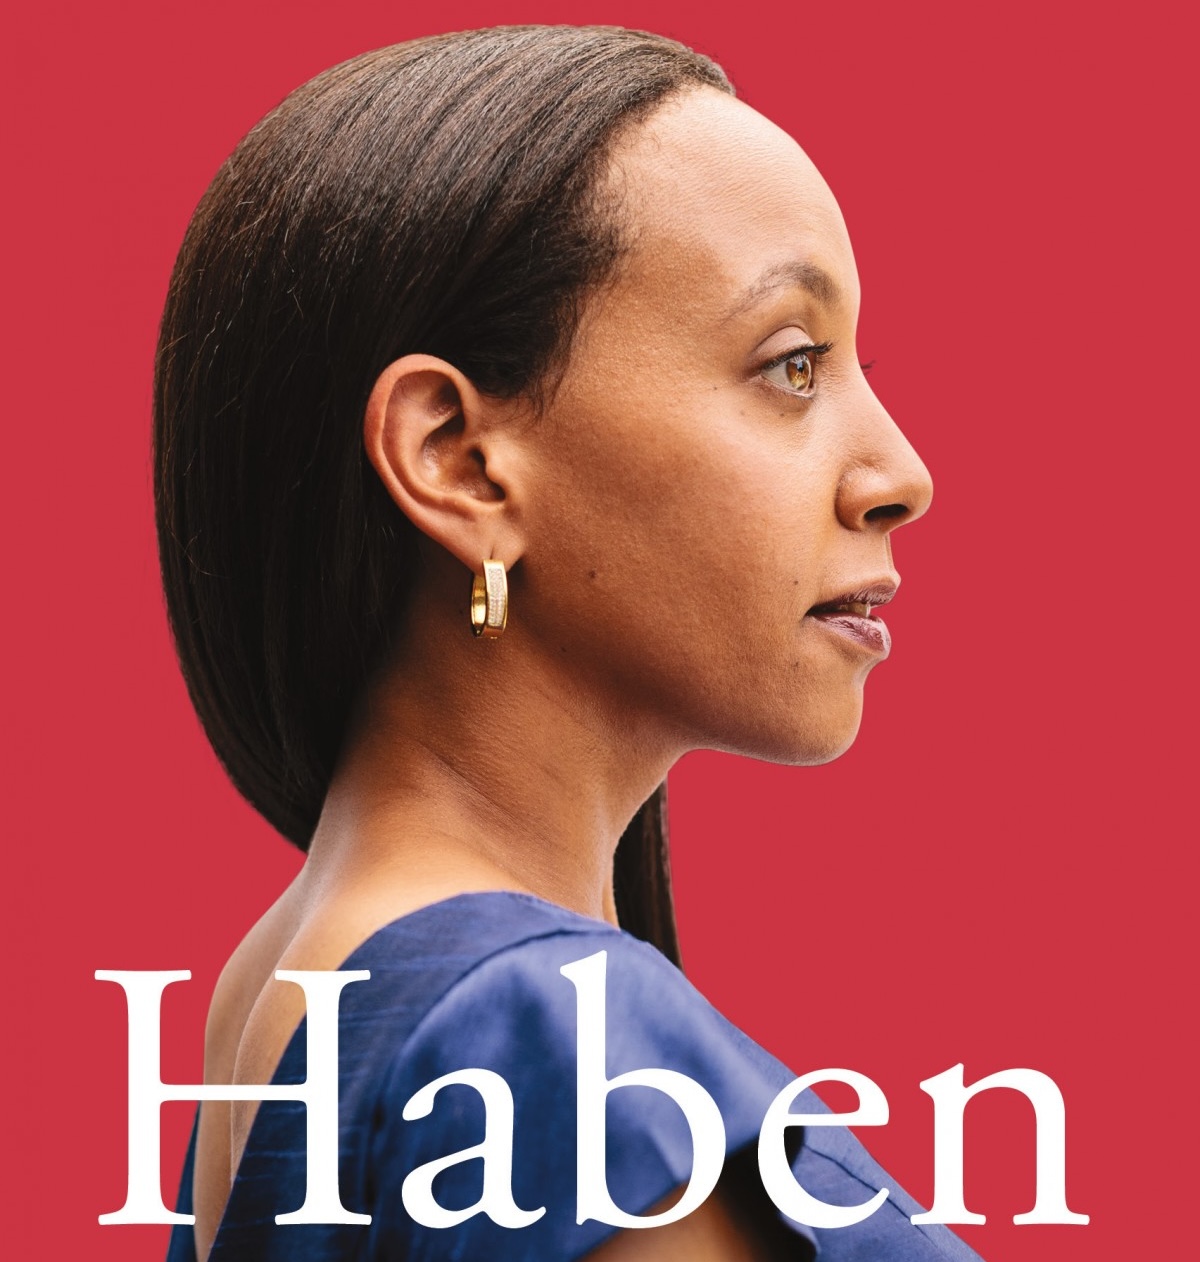 The book cover shows Haben Girma in profile, confidently facing forward in a blue dress. The background is a warm red, and white text over the bottom half of the image says, ‘Haben: The Deafblind Woman Who Conquered Harvard Law. Haben Girma.’